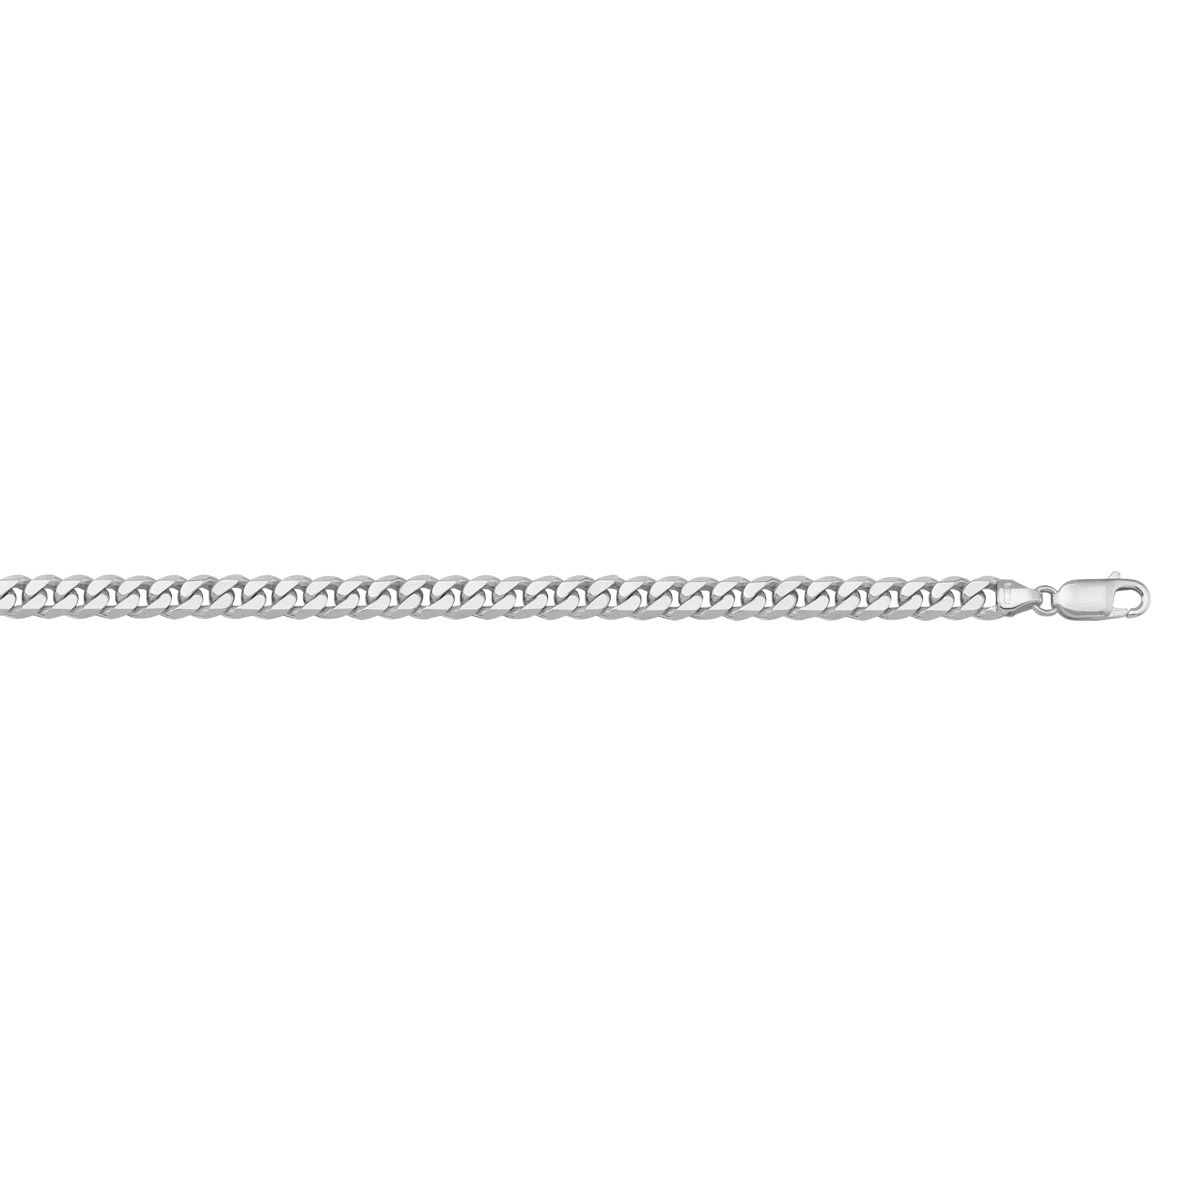 CCRB02, Gold Chain, Flat Beveled Curb, White Gold